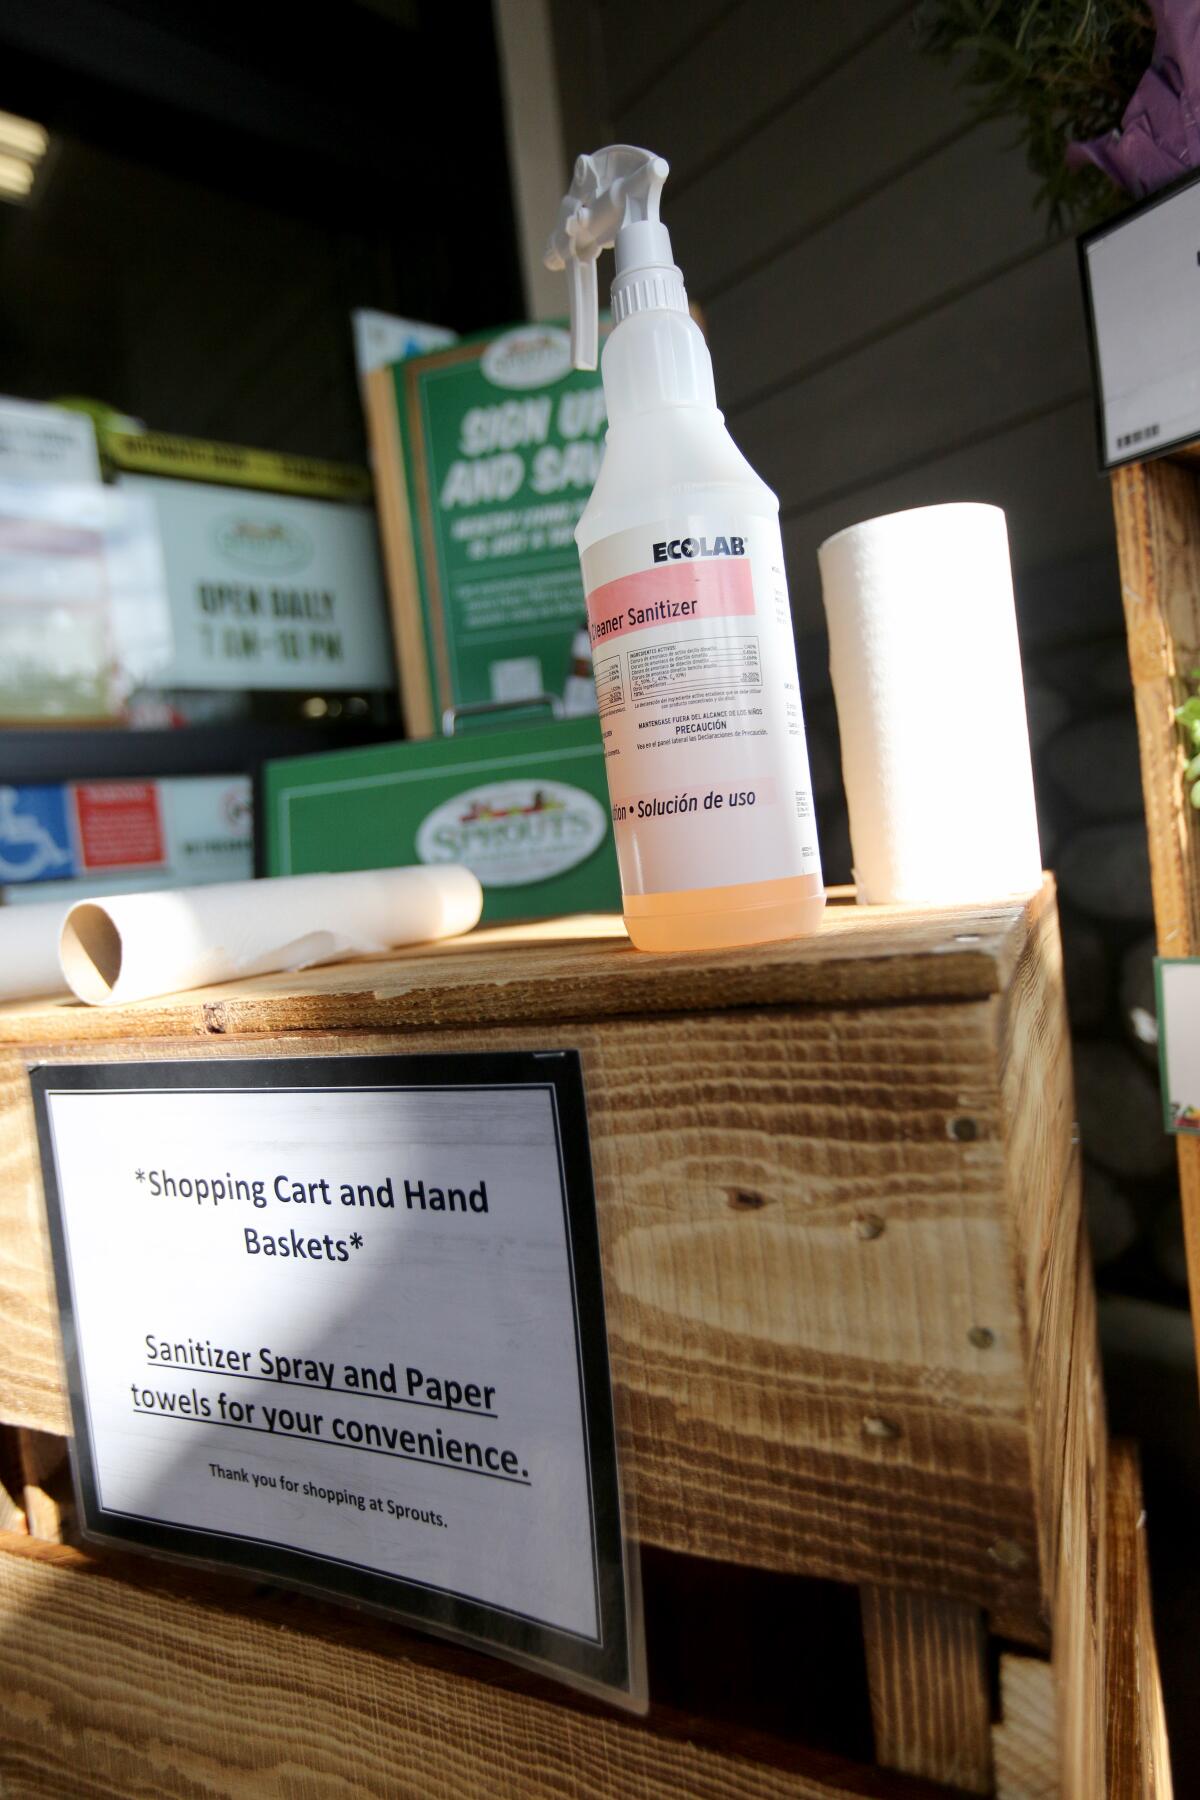 Because of novel coronavirus precautions, Sprouts placed sanitizer and paper towels outside the store.